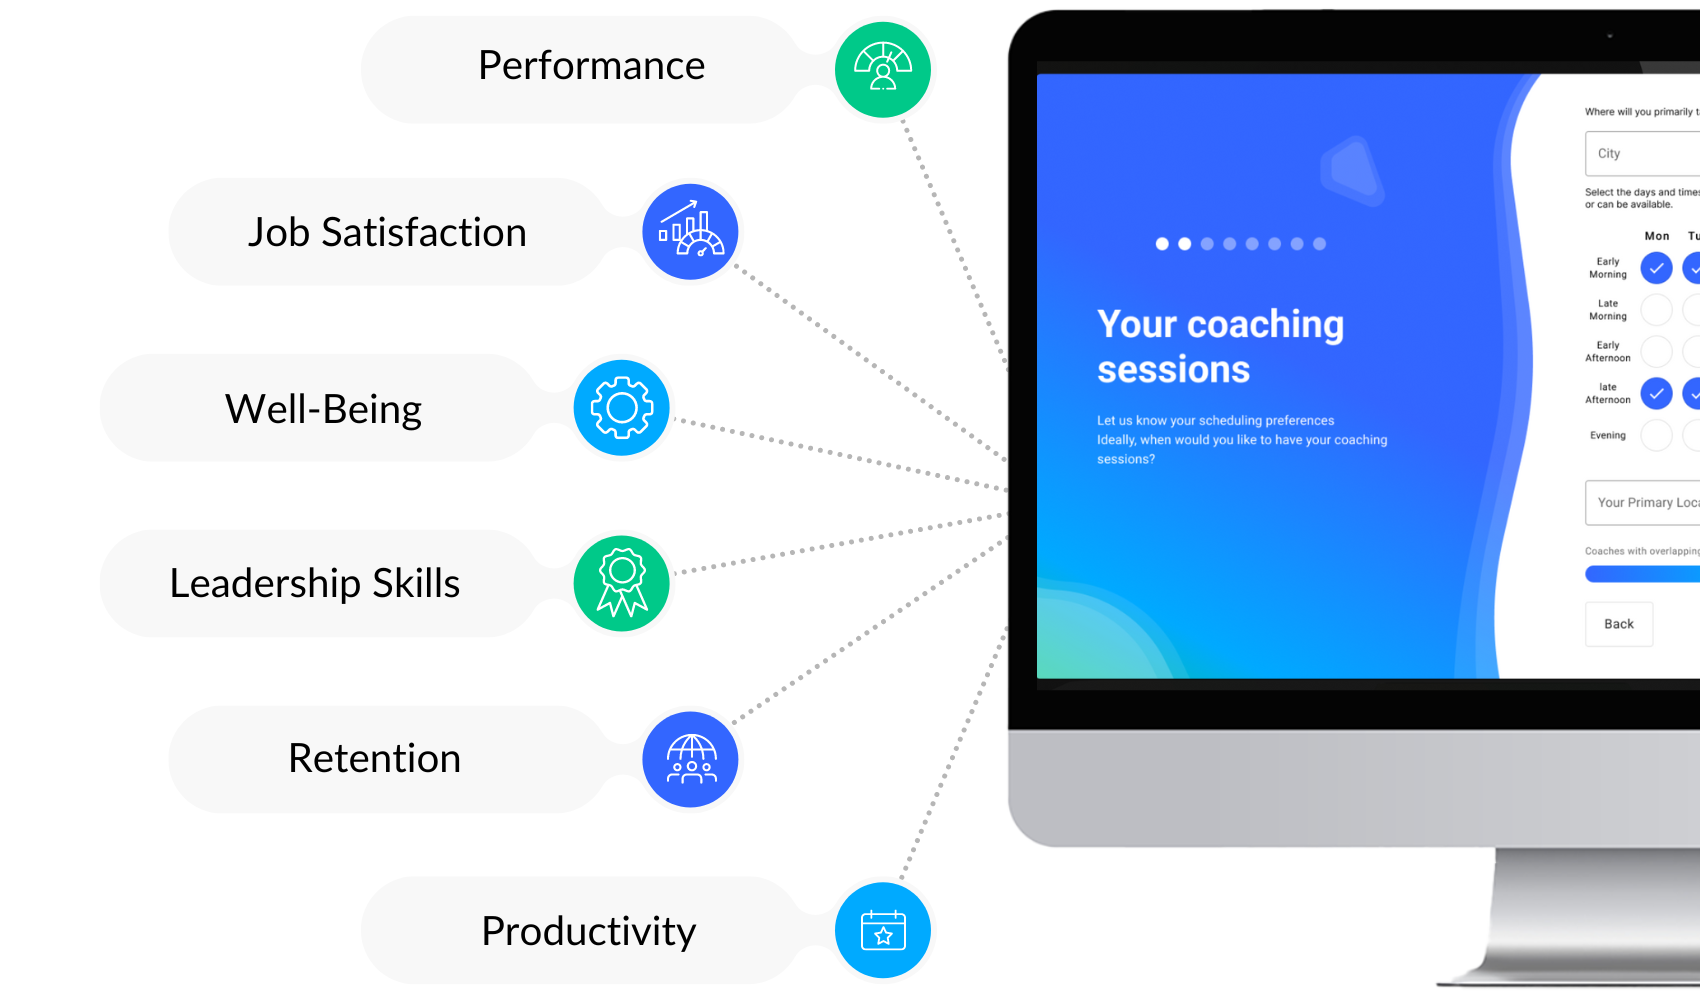 Your coaching sessions